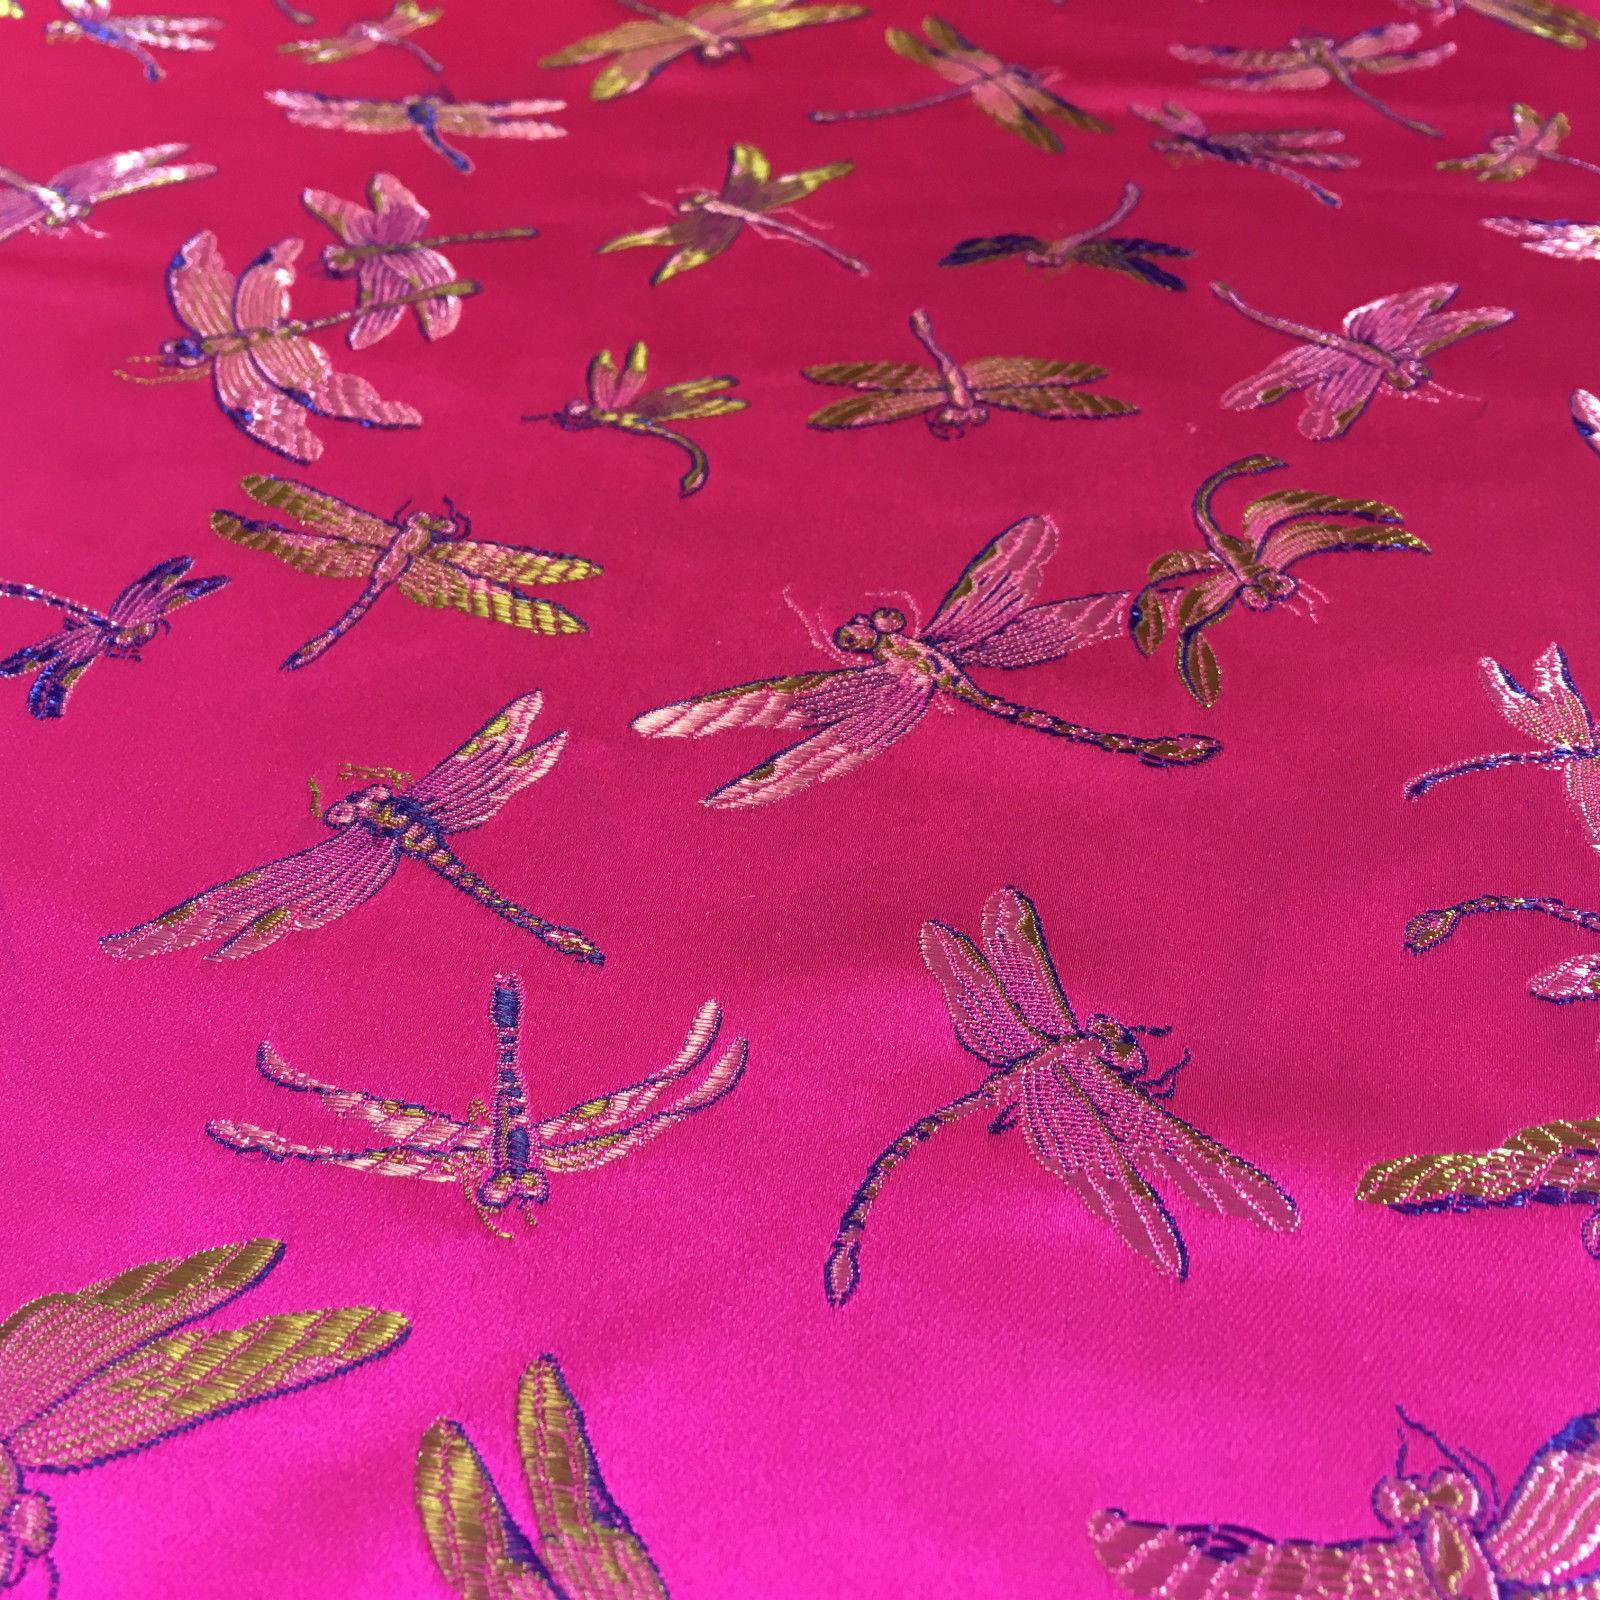 CHINESE ORIENTAL GOLD DRAGONFLY BROCADE SILKY SATIN DRESS FABRIC 44" M163